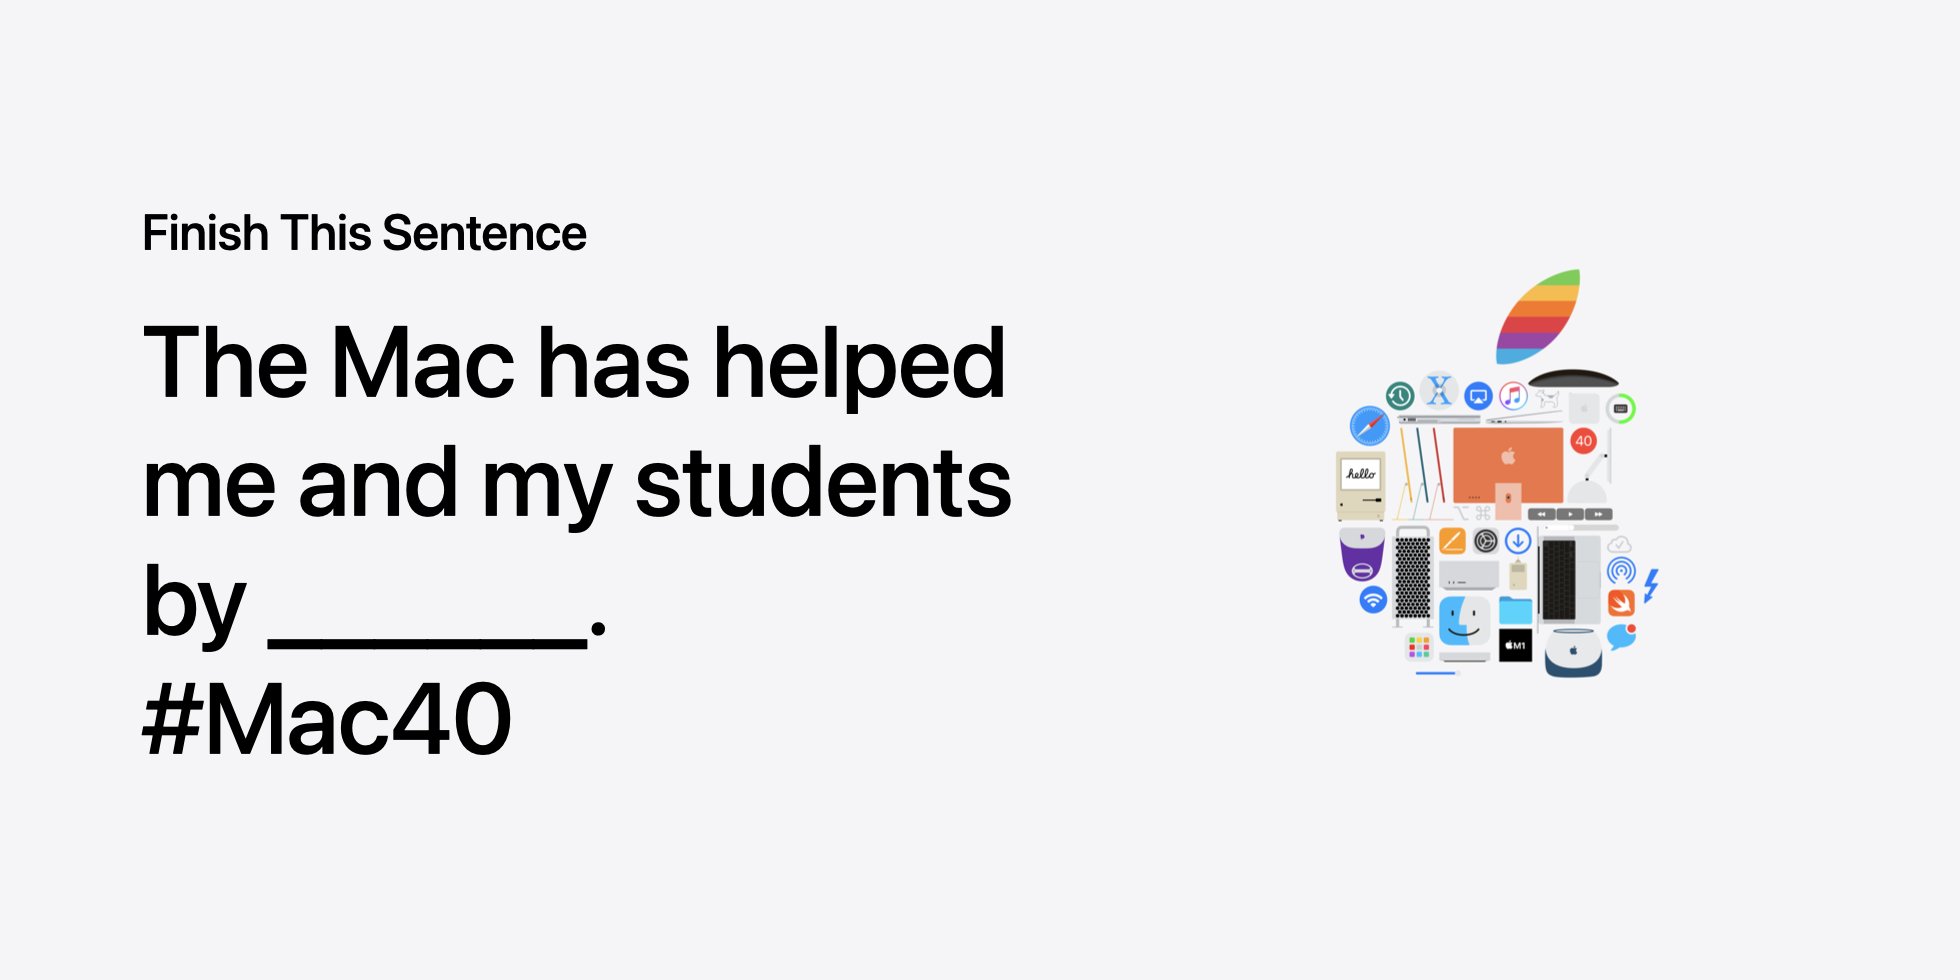 Finish This Sentence: The Mac has helped me and my students by… #Mac40